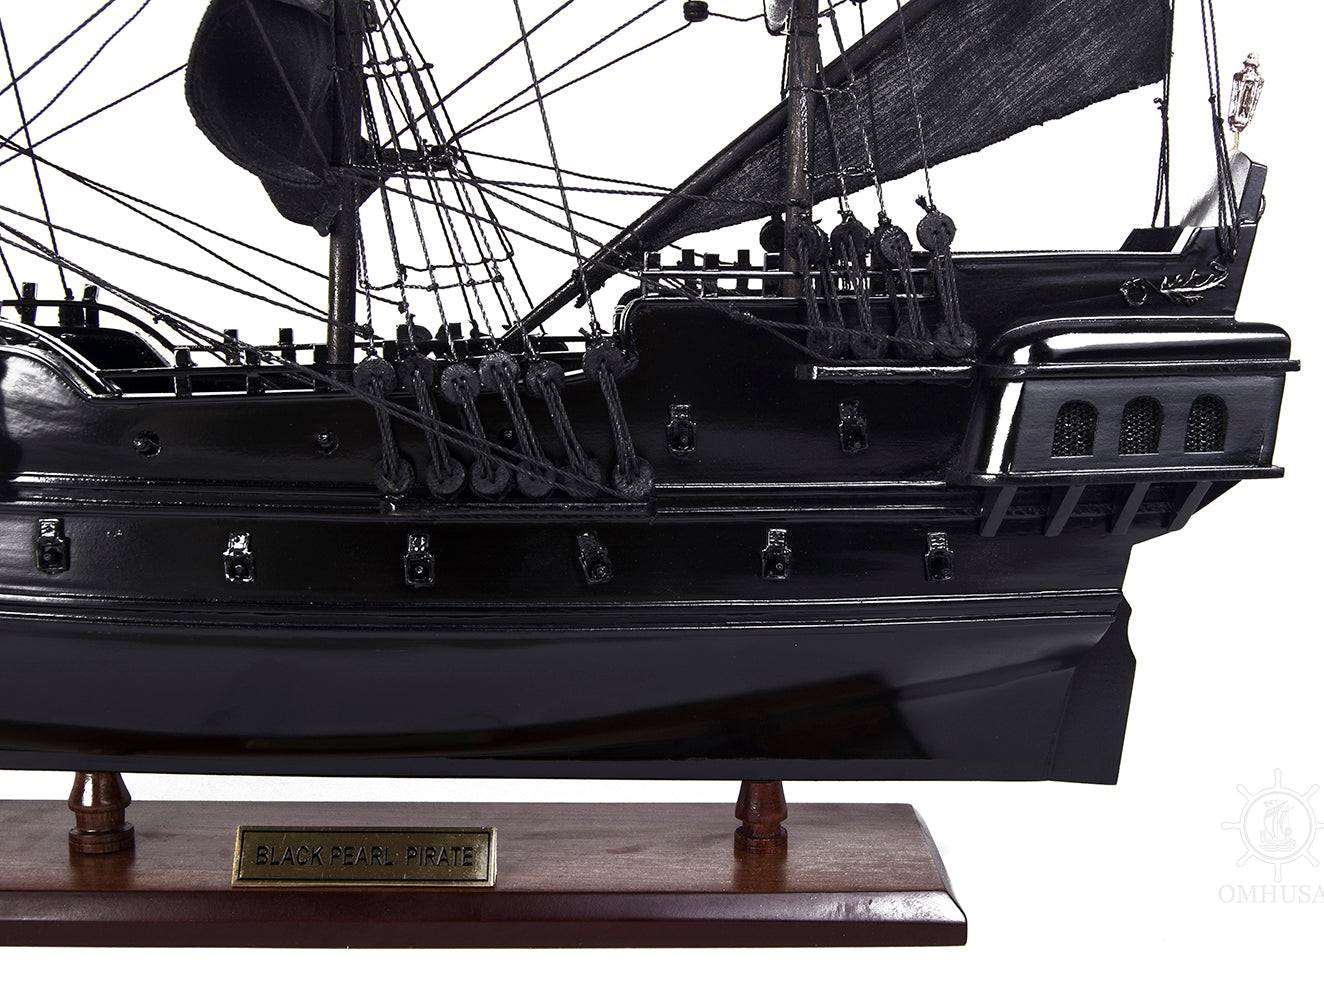 ALDO Hobbies & Creative Arts> Collectibles> Scale Model Black Pearl Pirates of The Caribbean Exclusive Edition Small Tall Ship Wood Model Sailboat Assembled